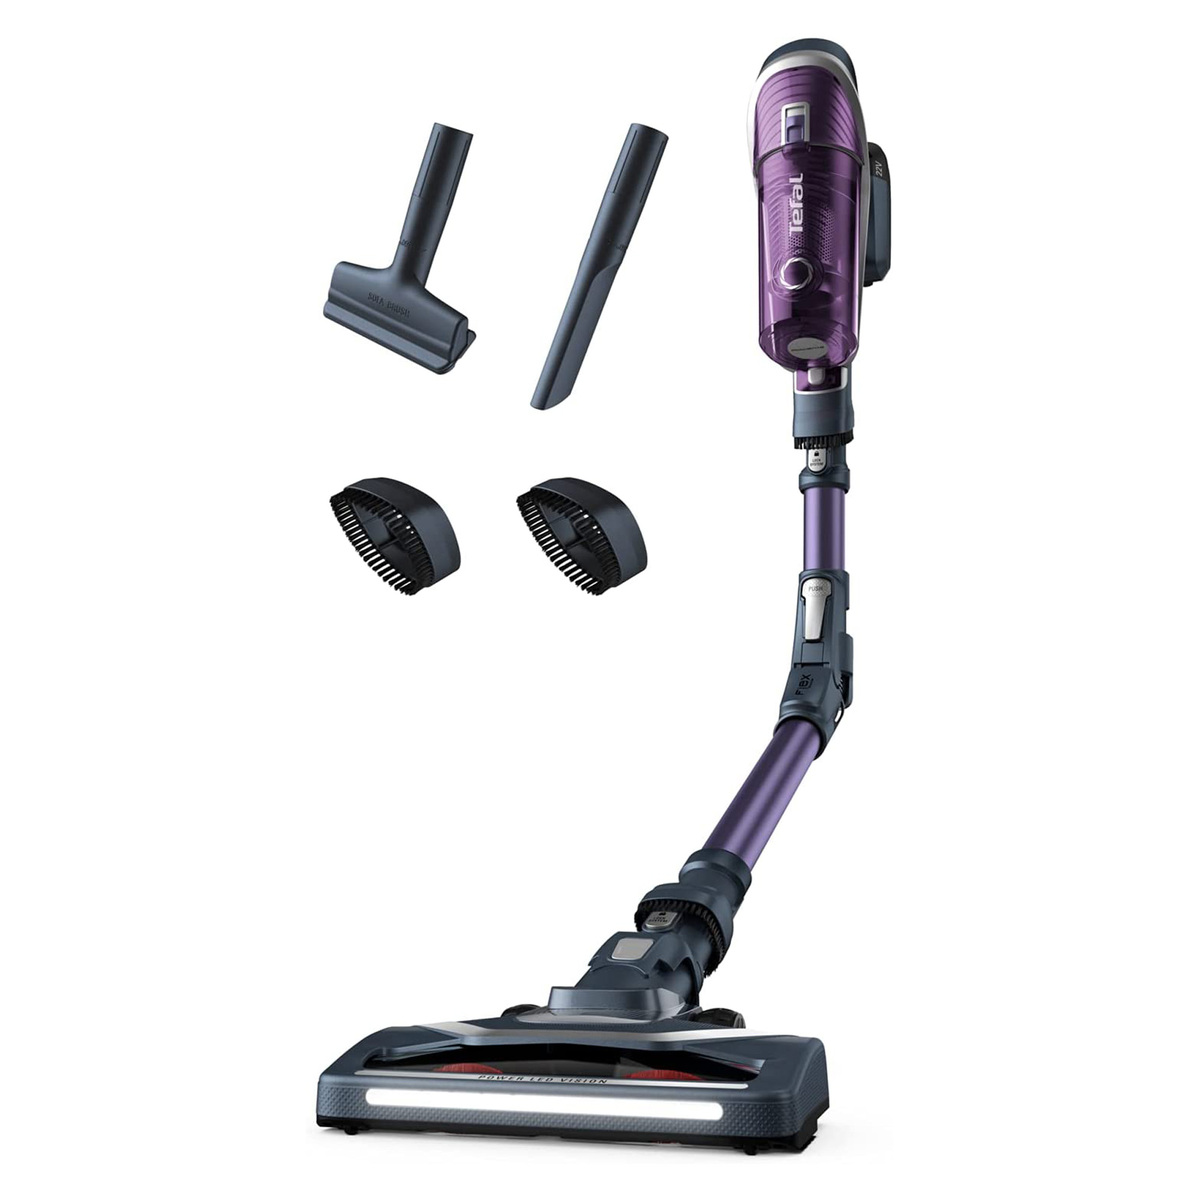 Tefal X-Force 8.60 Cordless Vacuum Cleaner TY9639HO